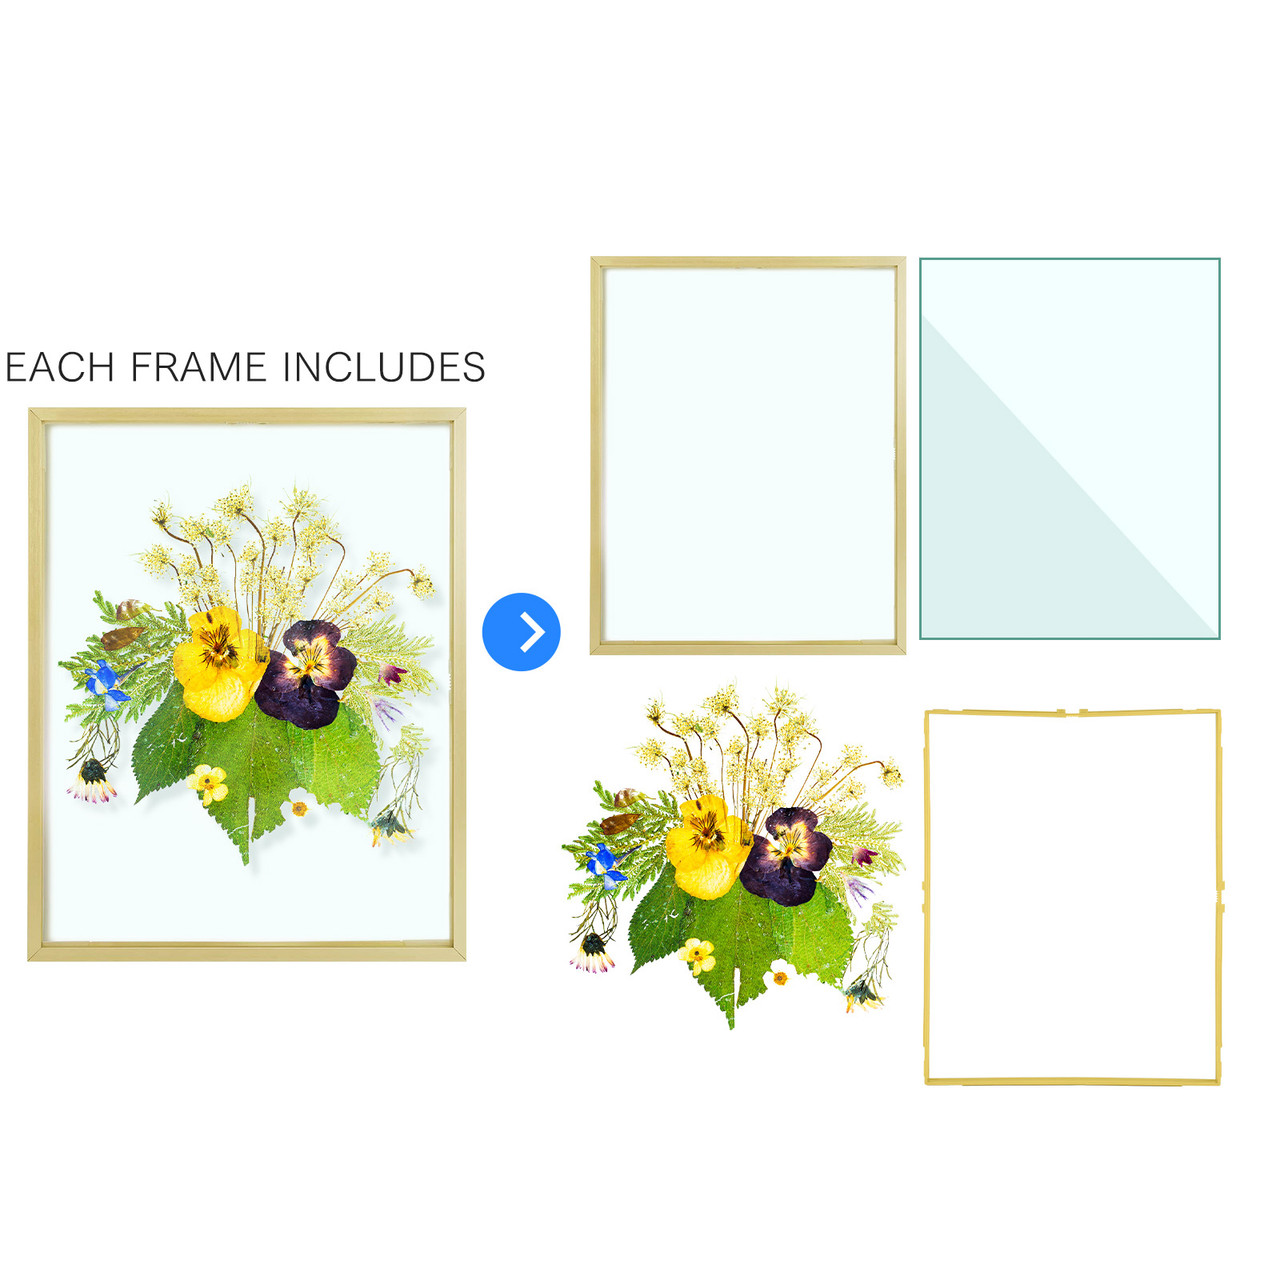 Mat Board Center, Set of 3, 11x14 Aluminum Metal Picture Frames - Wall  Display - for Art, Prints, Photos, Prints and More (Gold, 11x14)